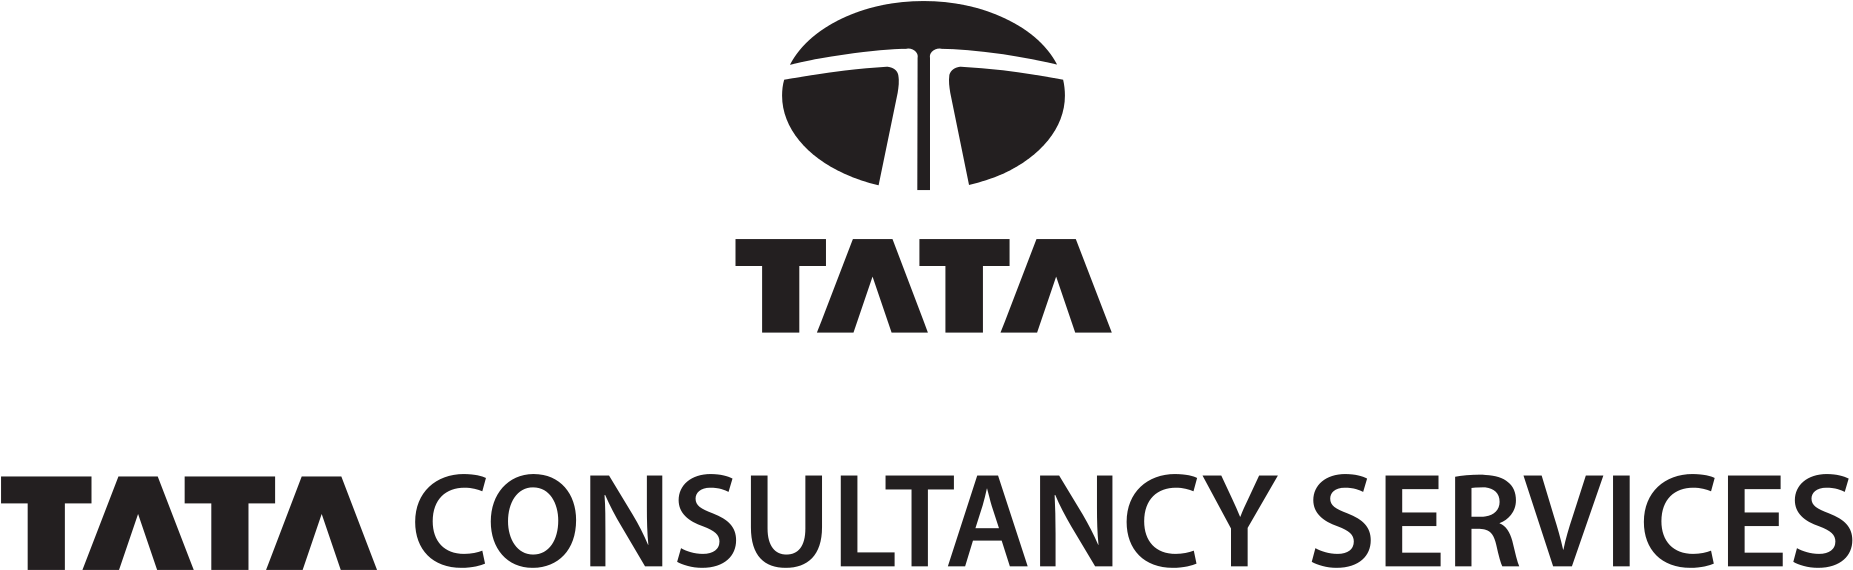 Tata Consultancy Services Logo PNG image